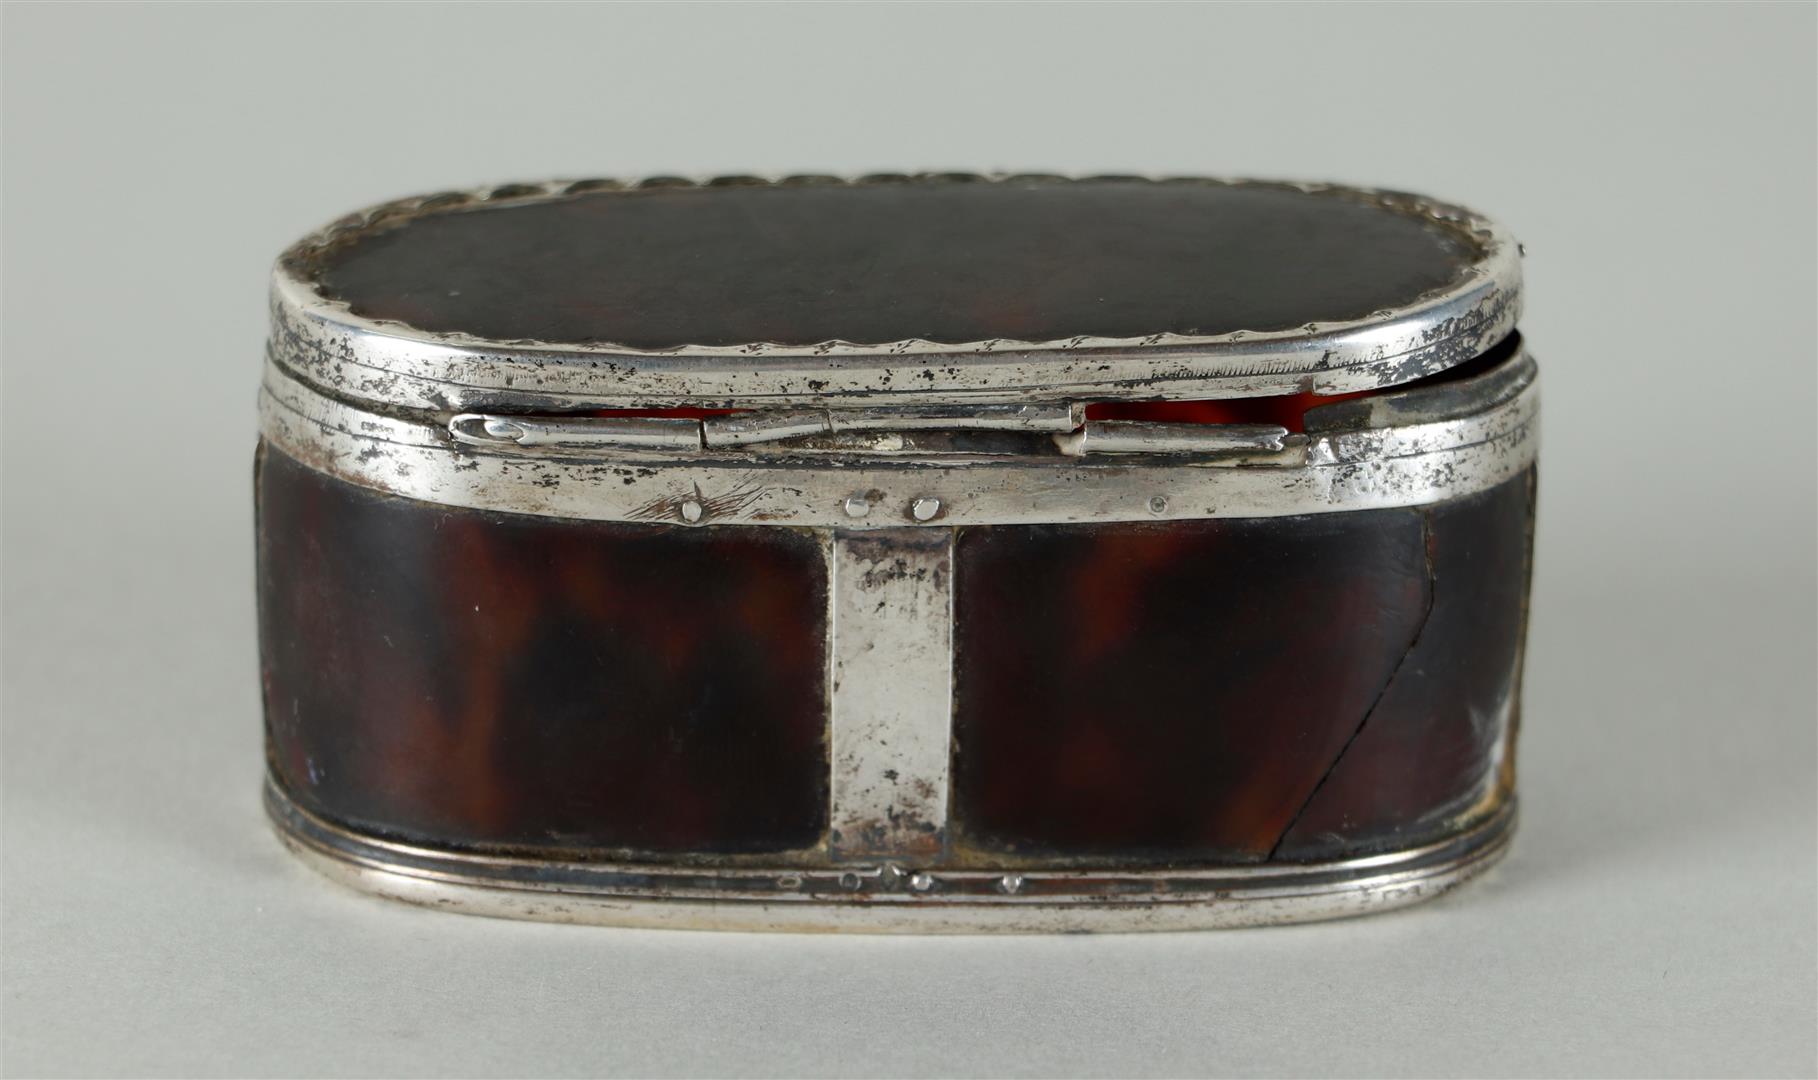 Tortoise Snuff Box with Silver Frames (Holland, 17th Century) - Image 5 of 7